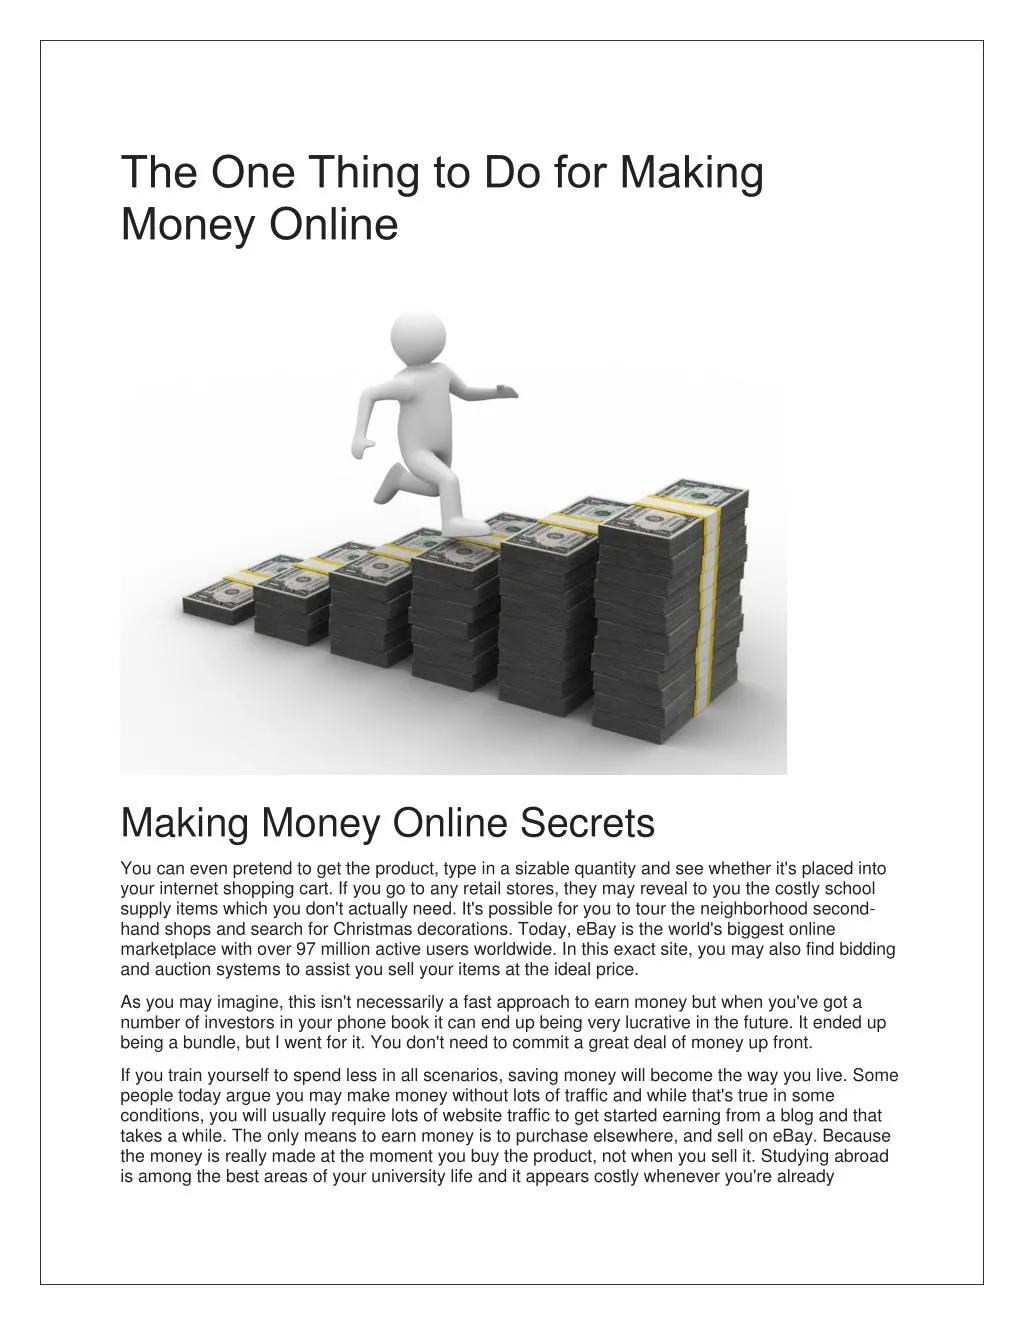 the one thing to do for making money online